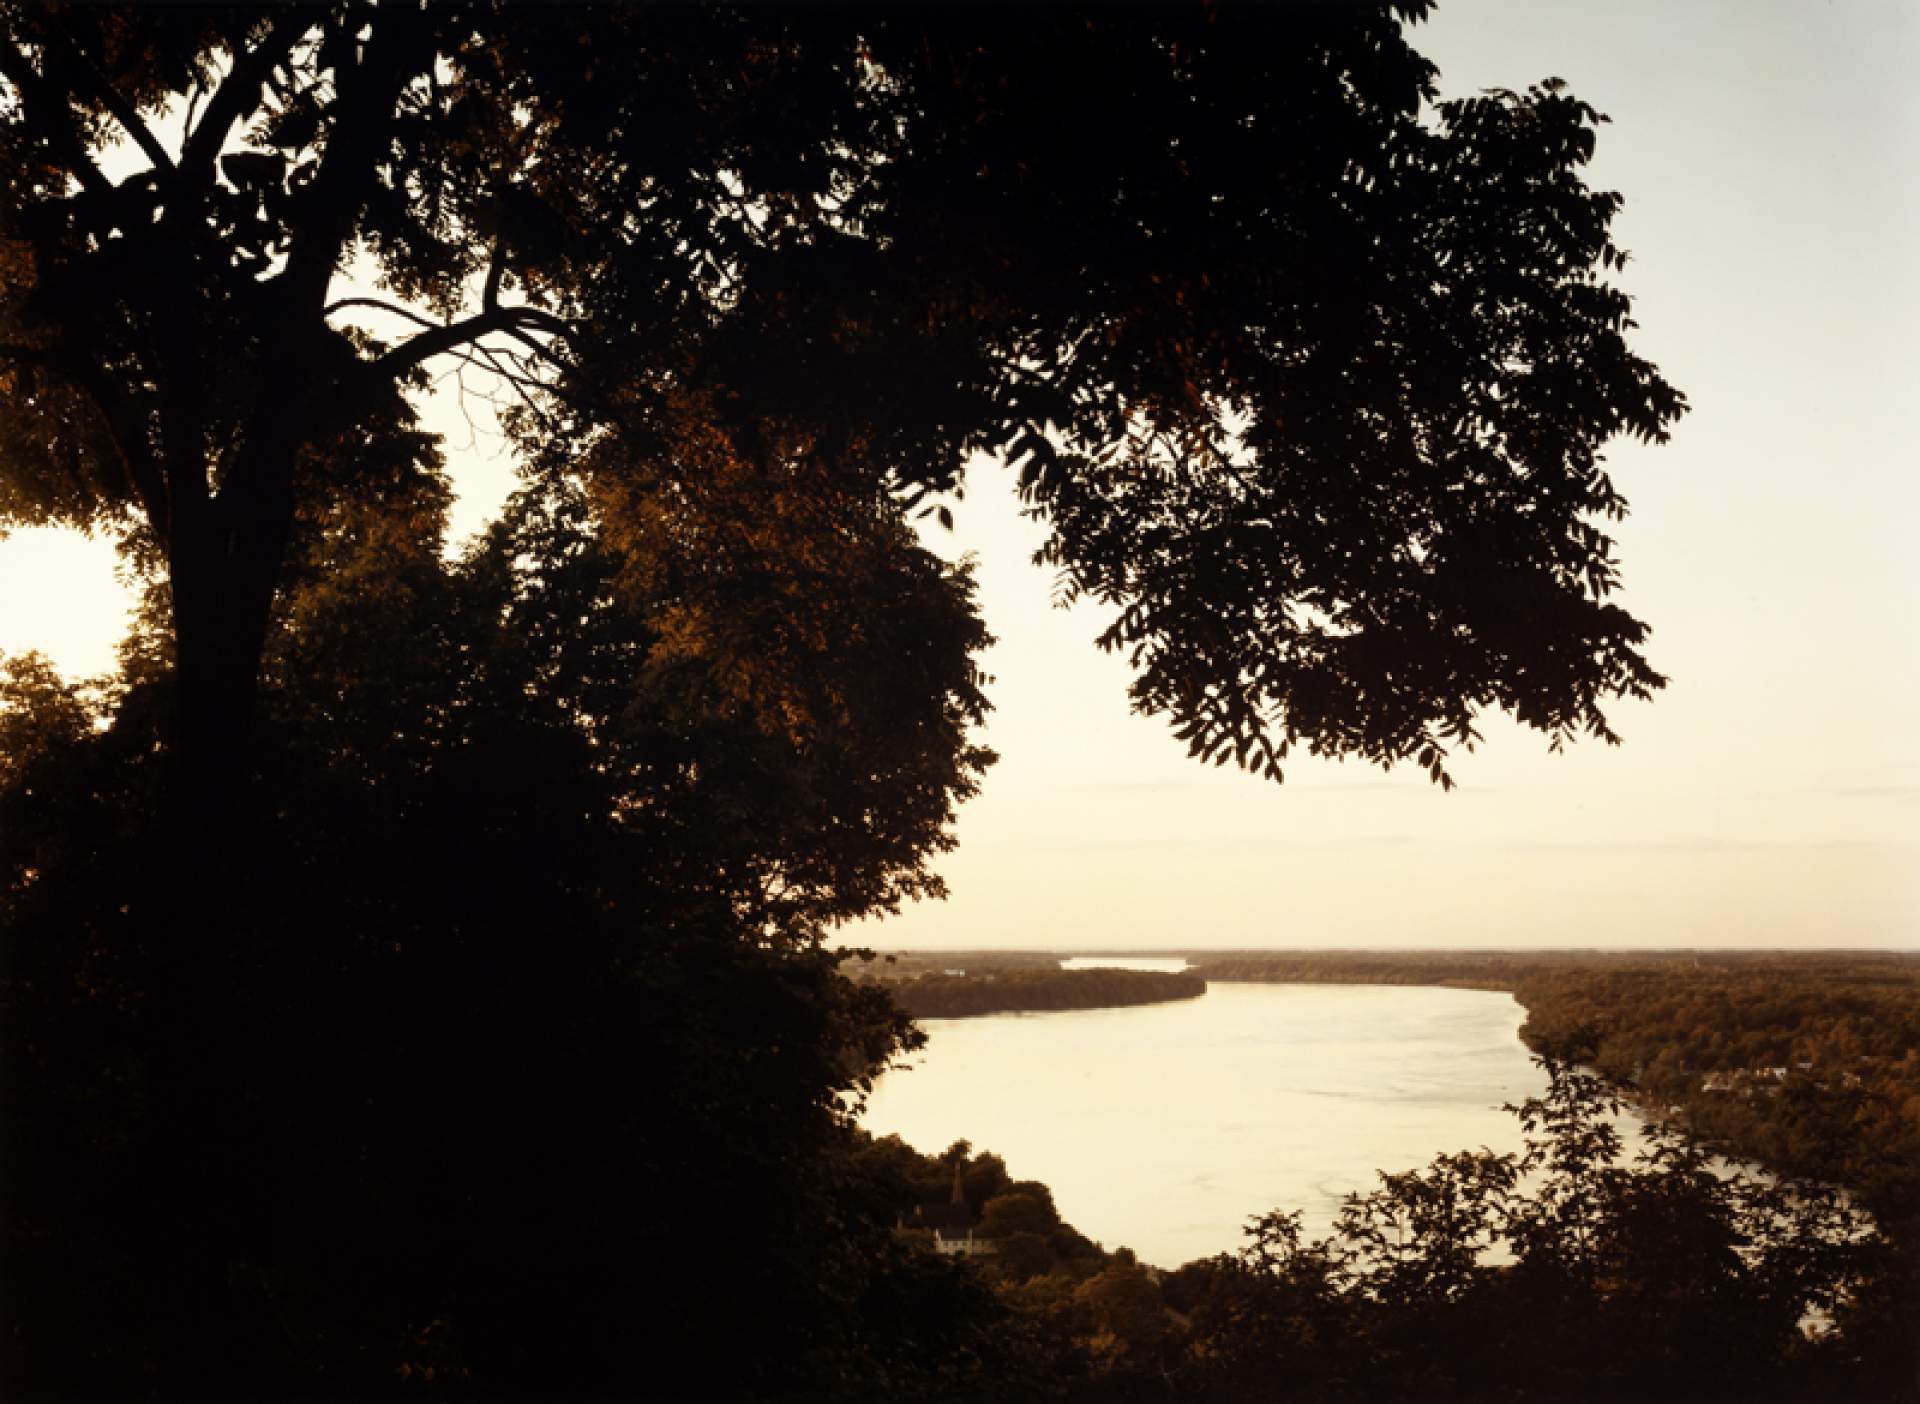 View of the Lower Niagara River from Brock's Monument, Ontario